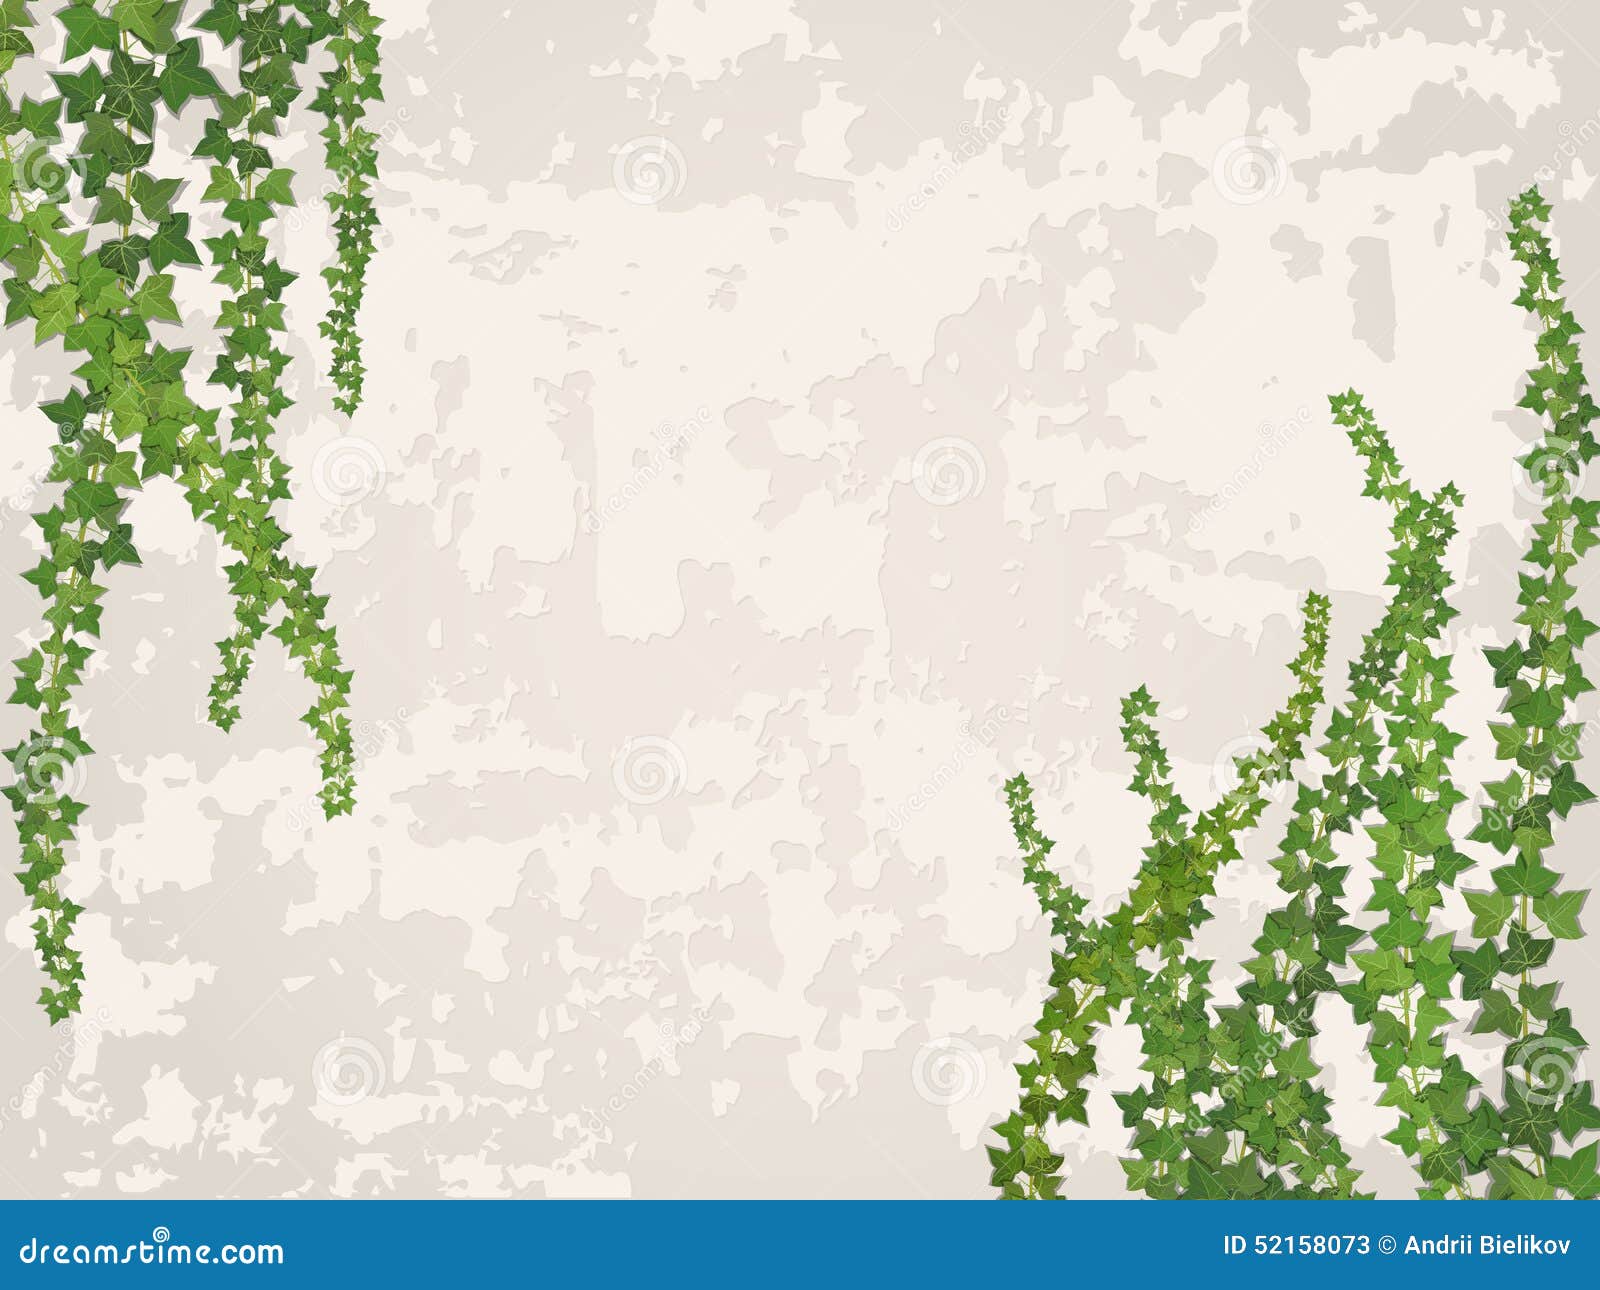 Hanging Vines On The Background Of Old Stucco Wall Cartoon Vector ...